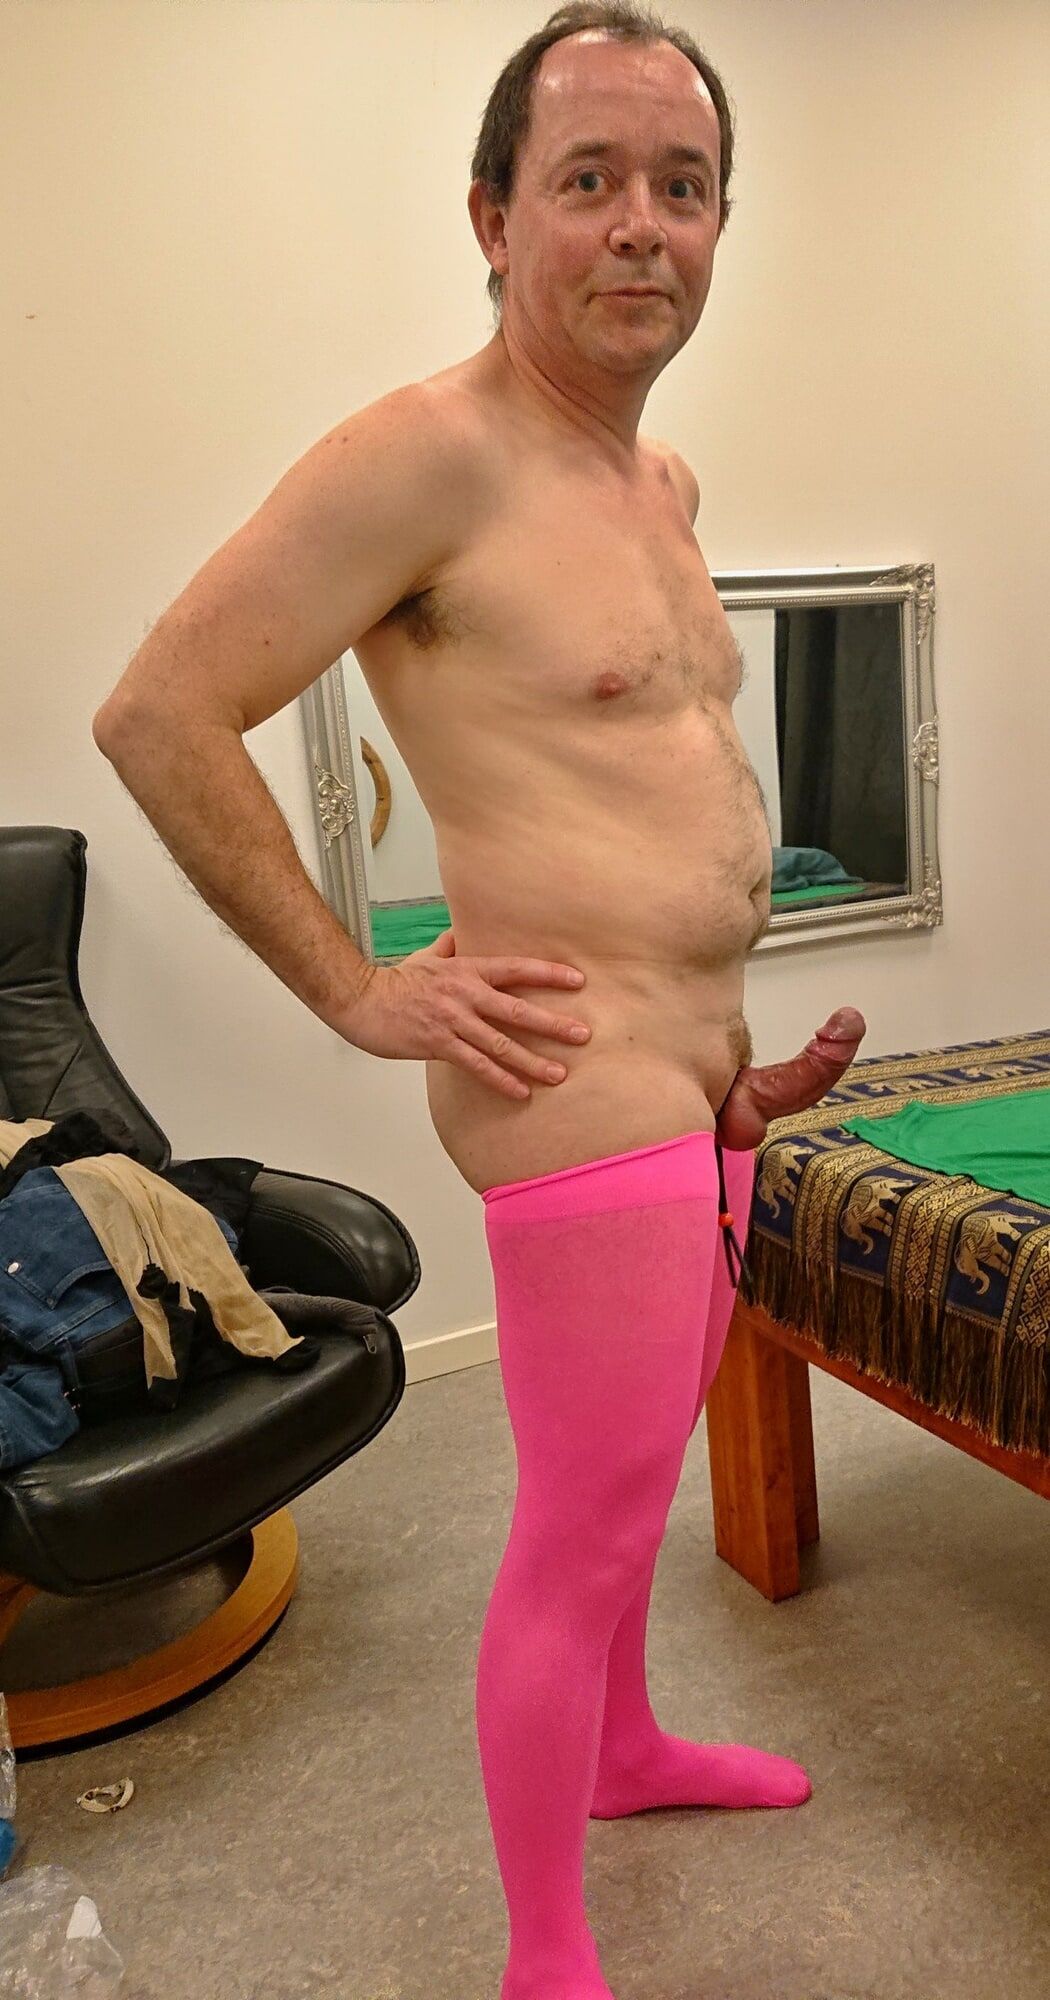 Crossdresser shows his stiff cock in sexy pink stockings #4